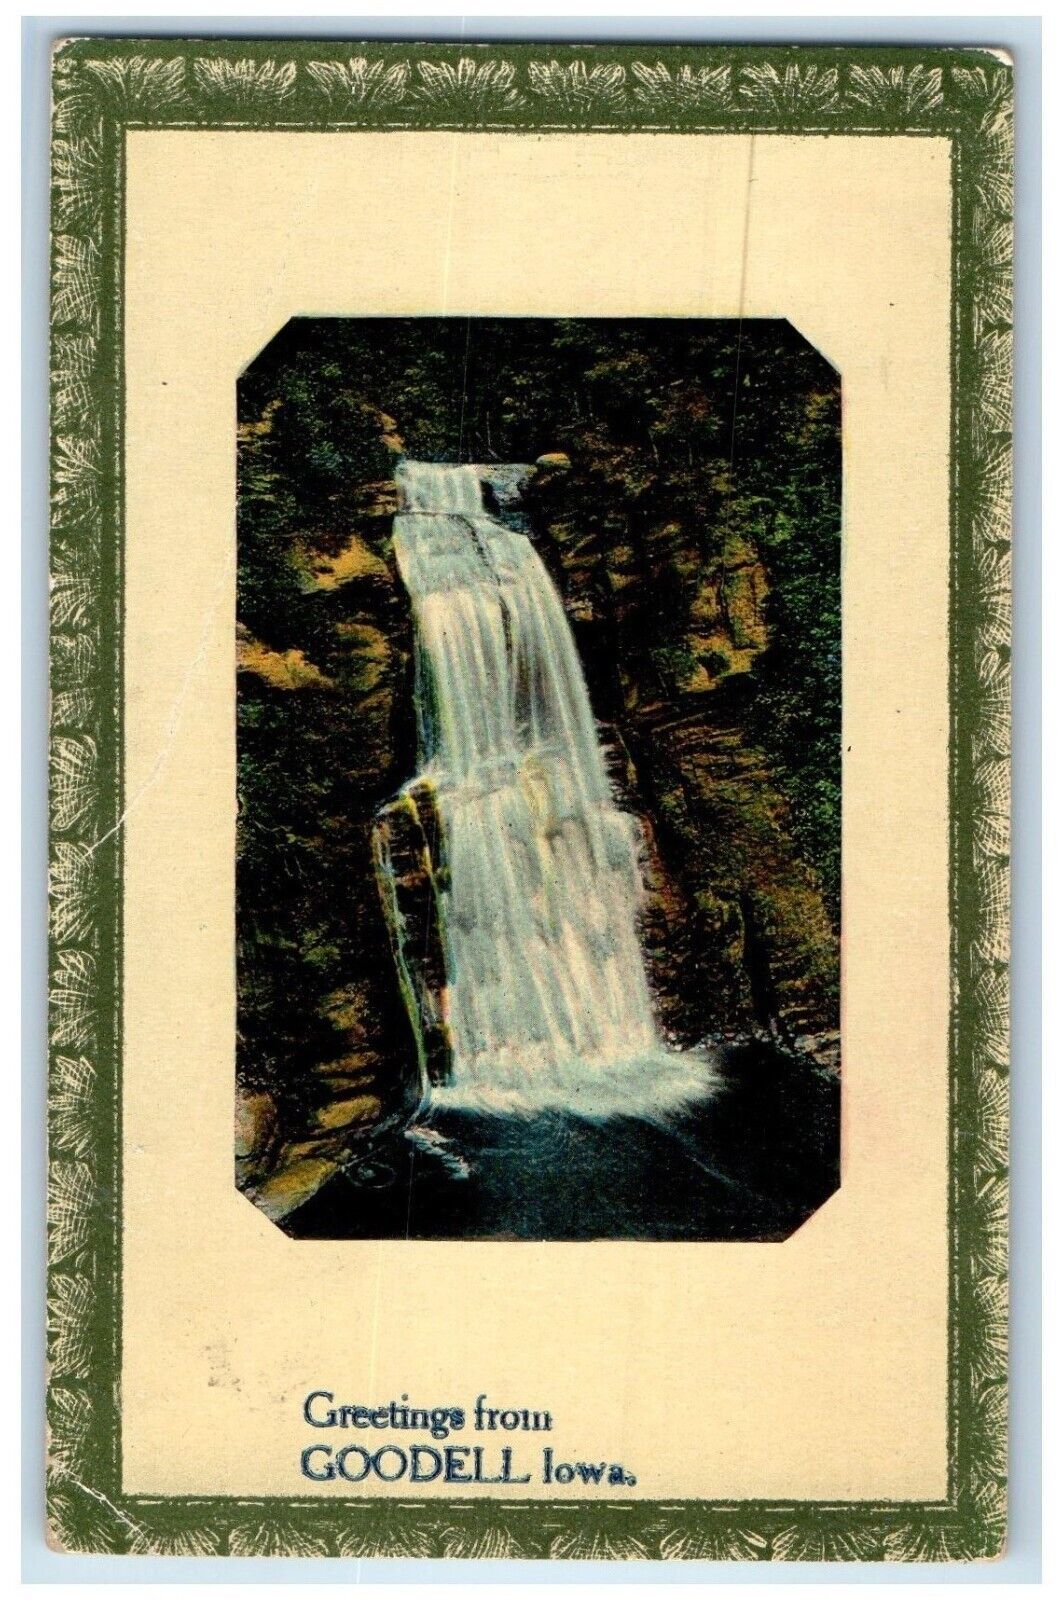 1911 Greetings From Goodwell Iowa IA, Waterfalls View Posted Antique Postcard